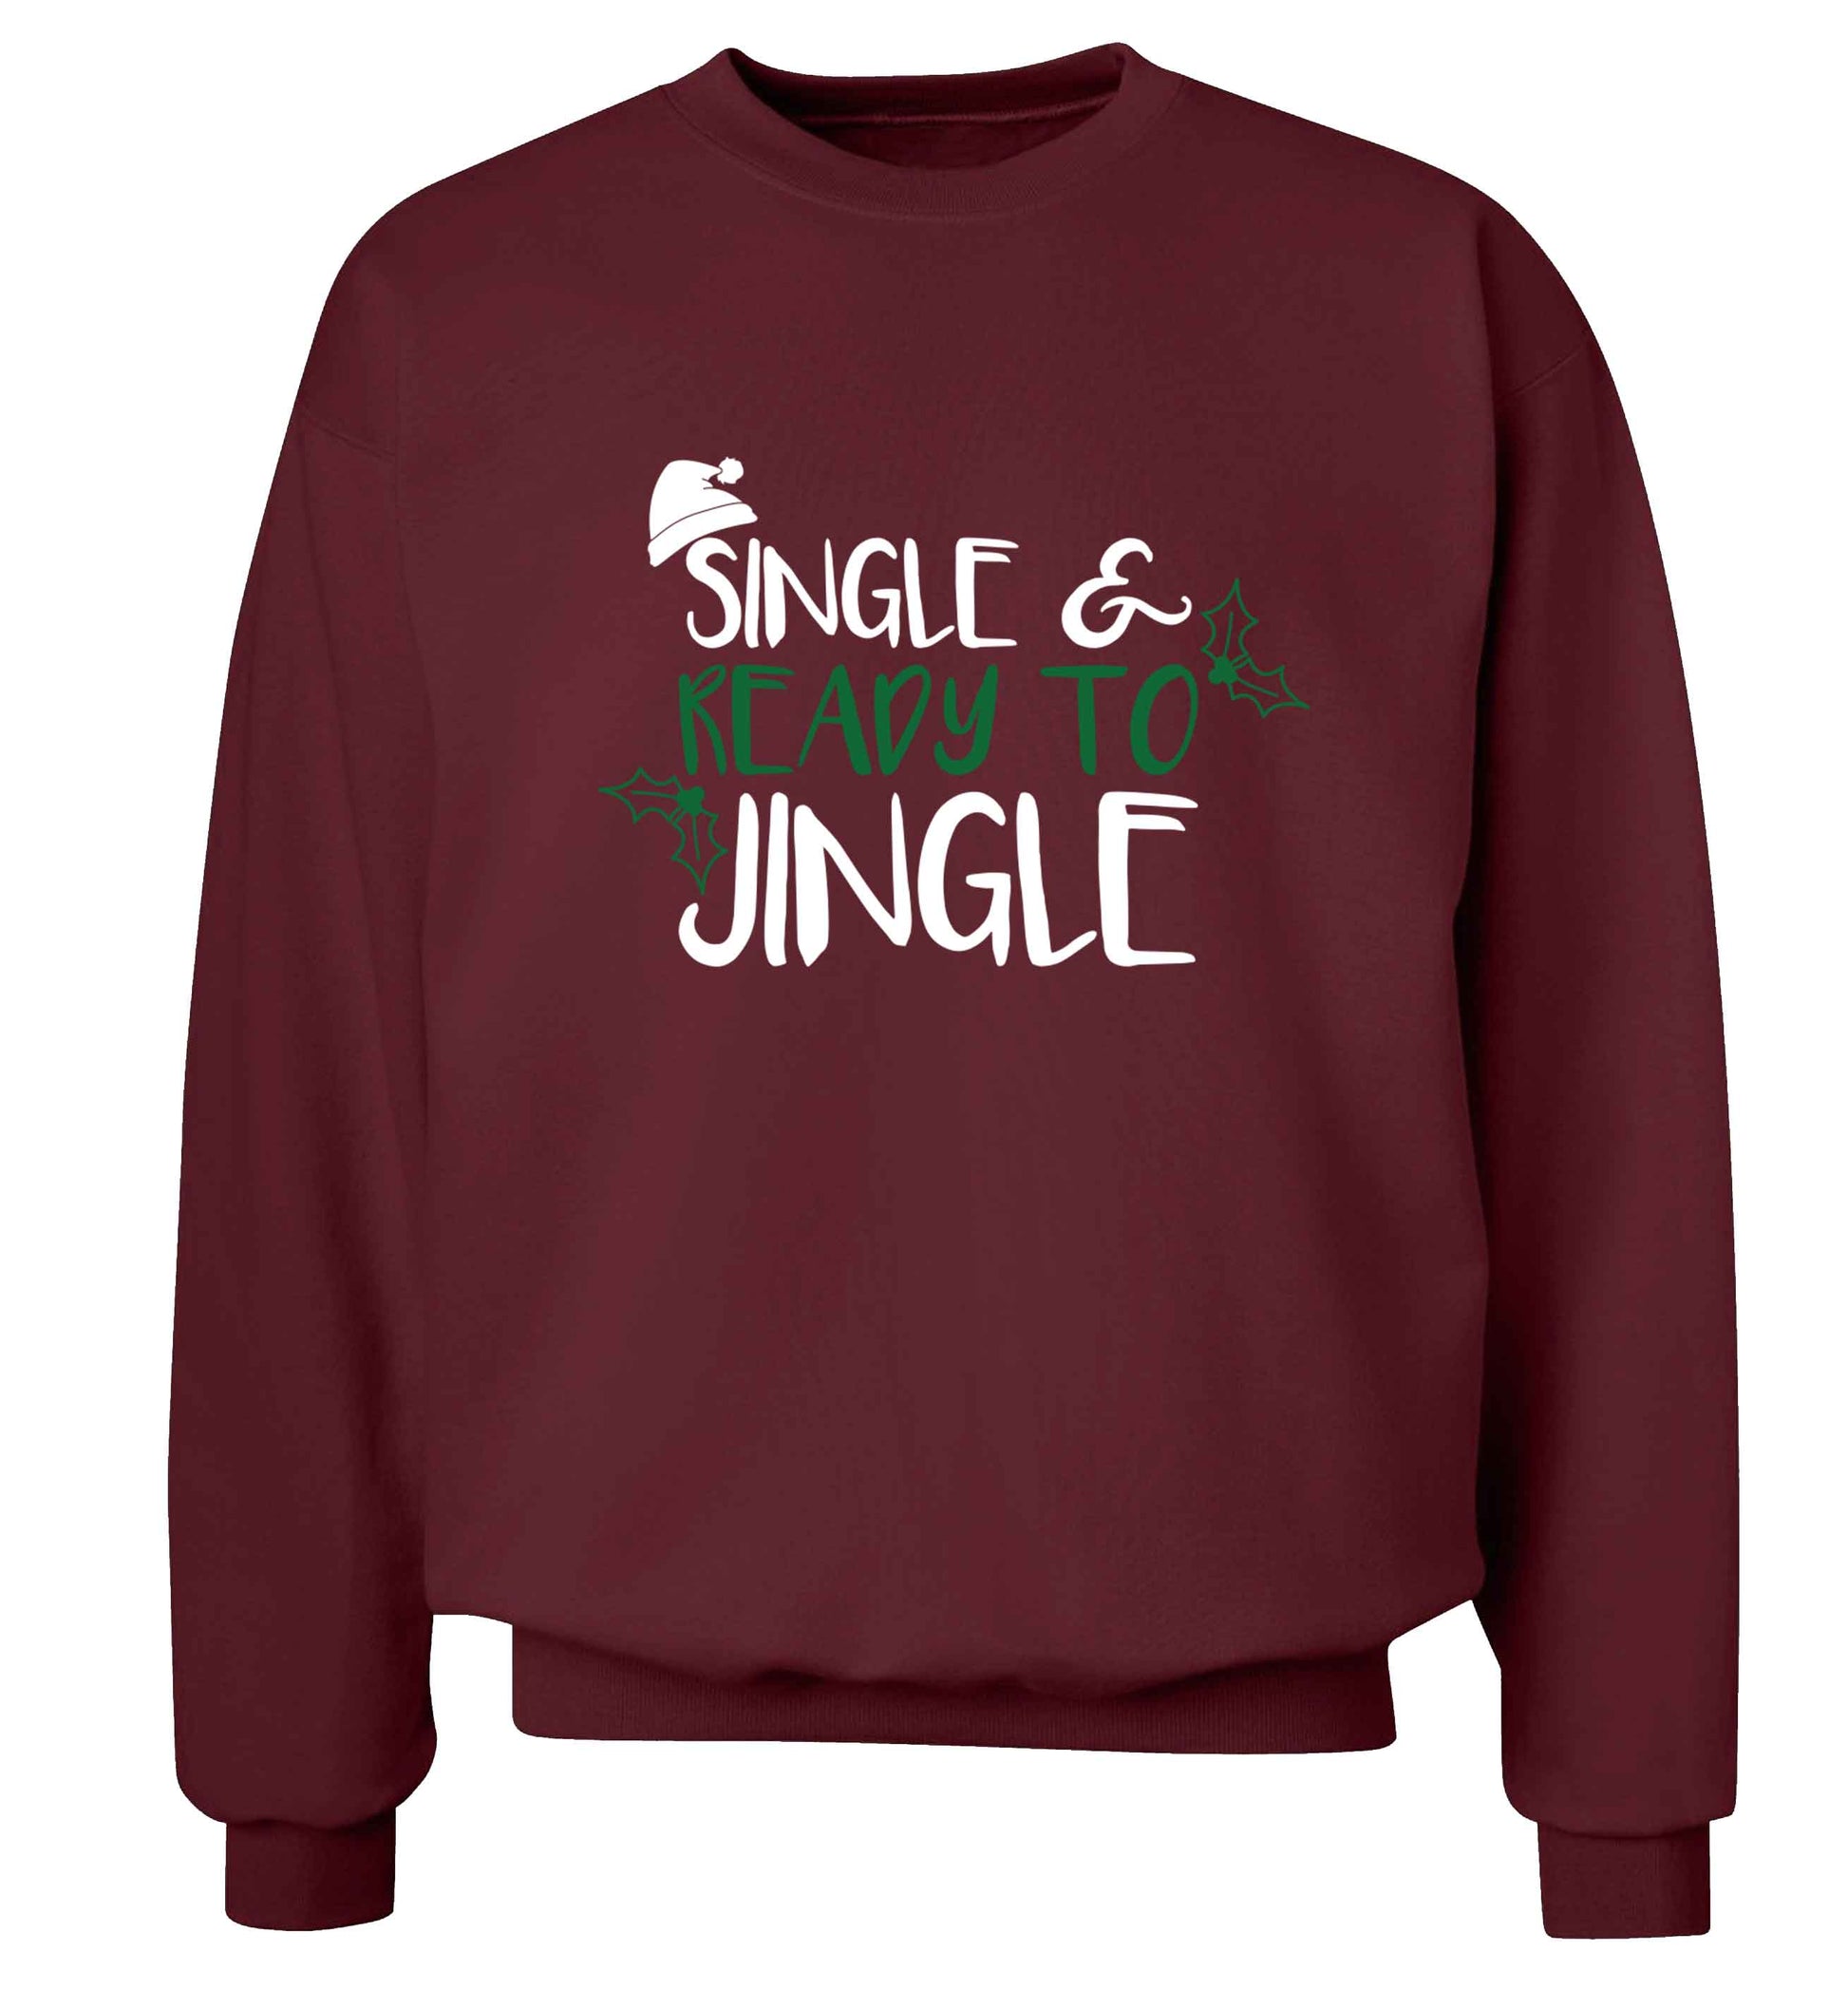 Single and ready to jingle Adult's unisex maroon Sweater 2XL